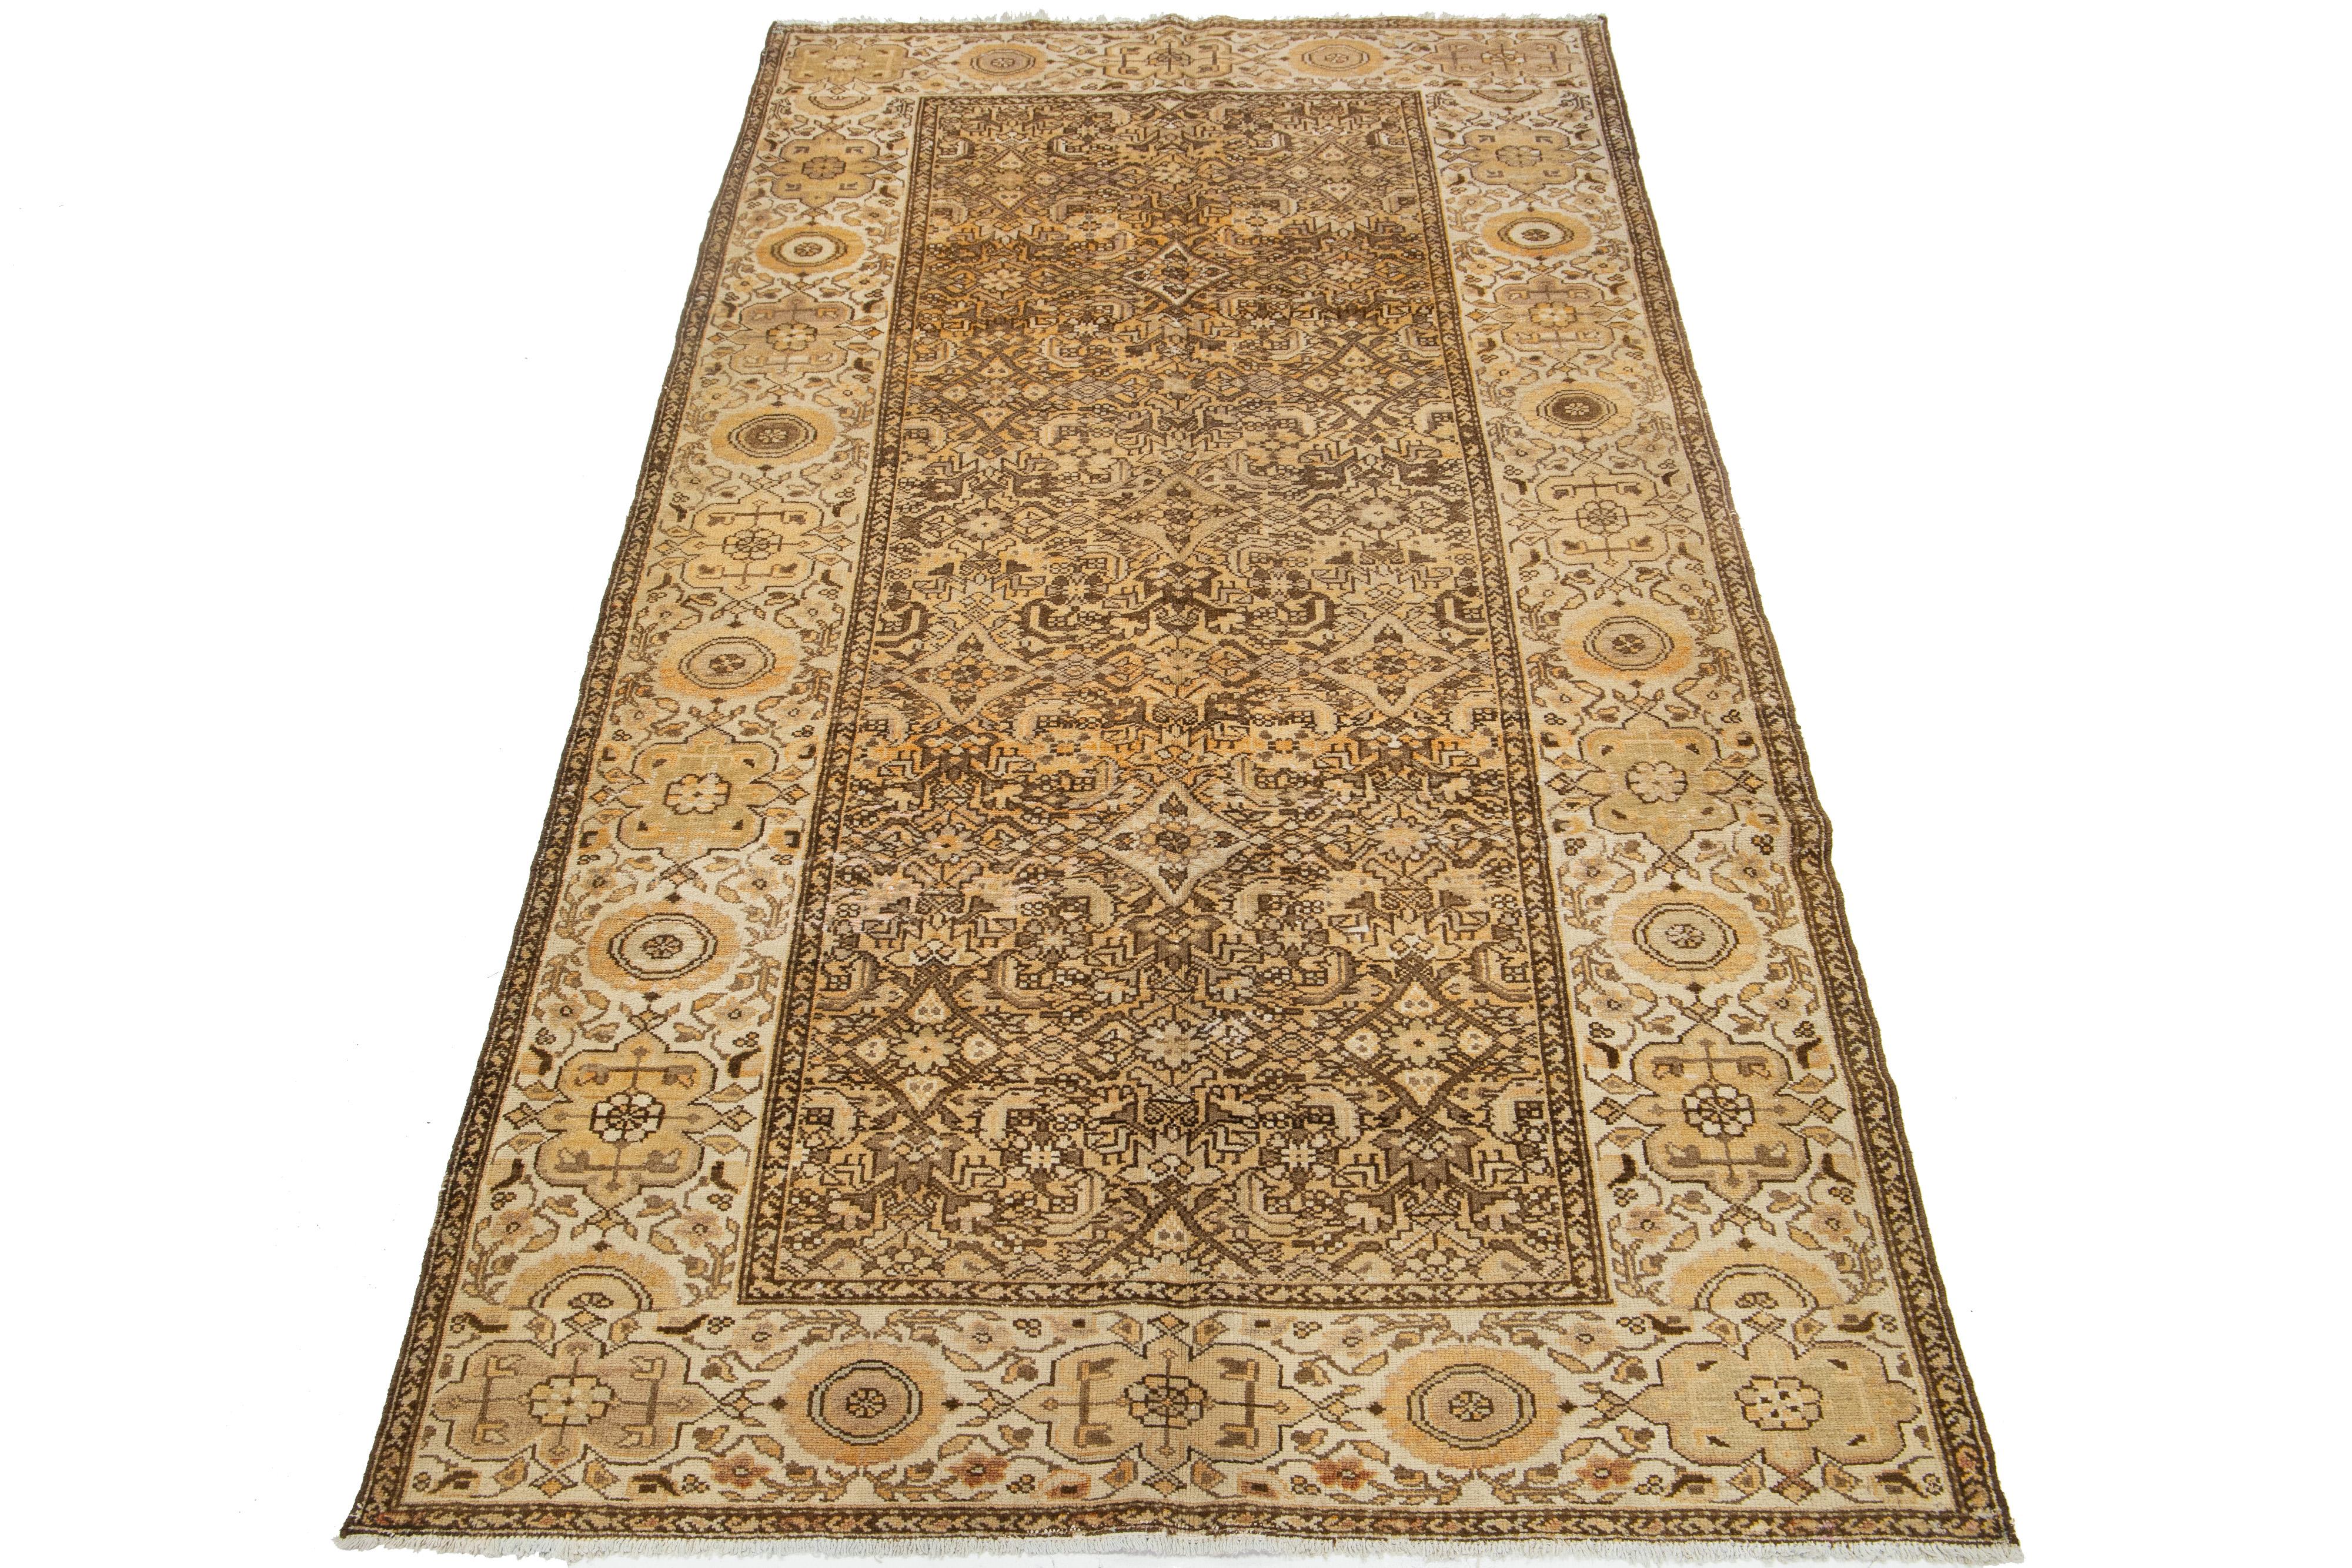 This antique Persian Malayer rug is hand-knotted wool. The design features a beautiful combination of beige and orange as the base, enhanced with brown highlights in a stunning, detailed floral pattern.

This rug measures 4'11